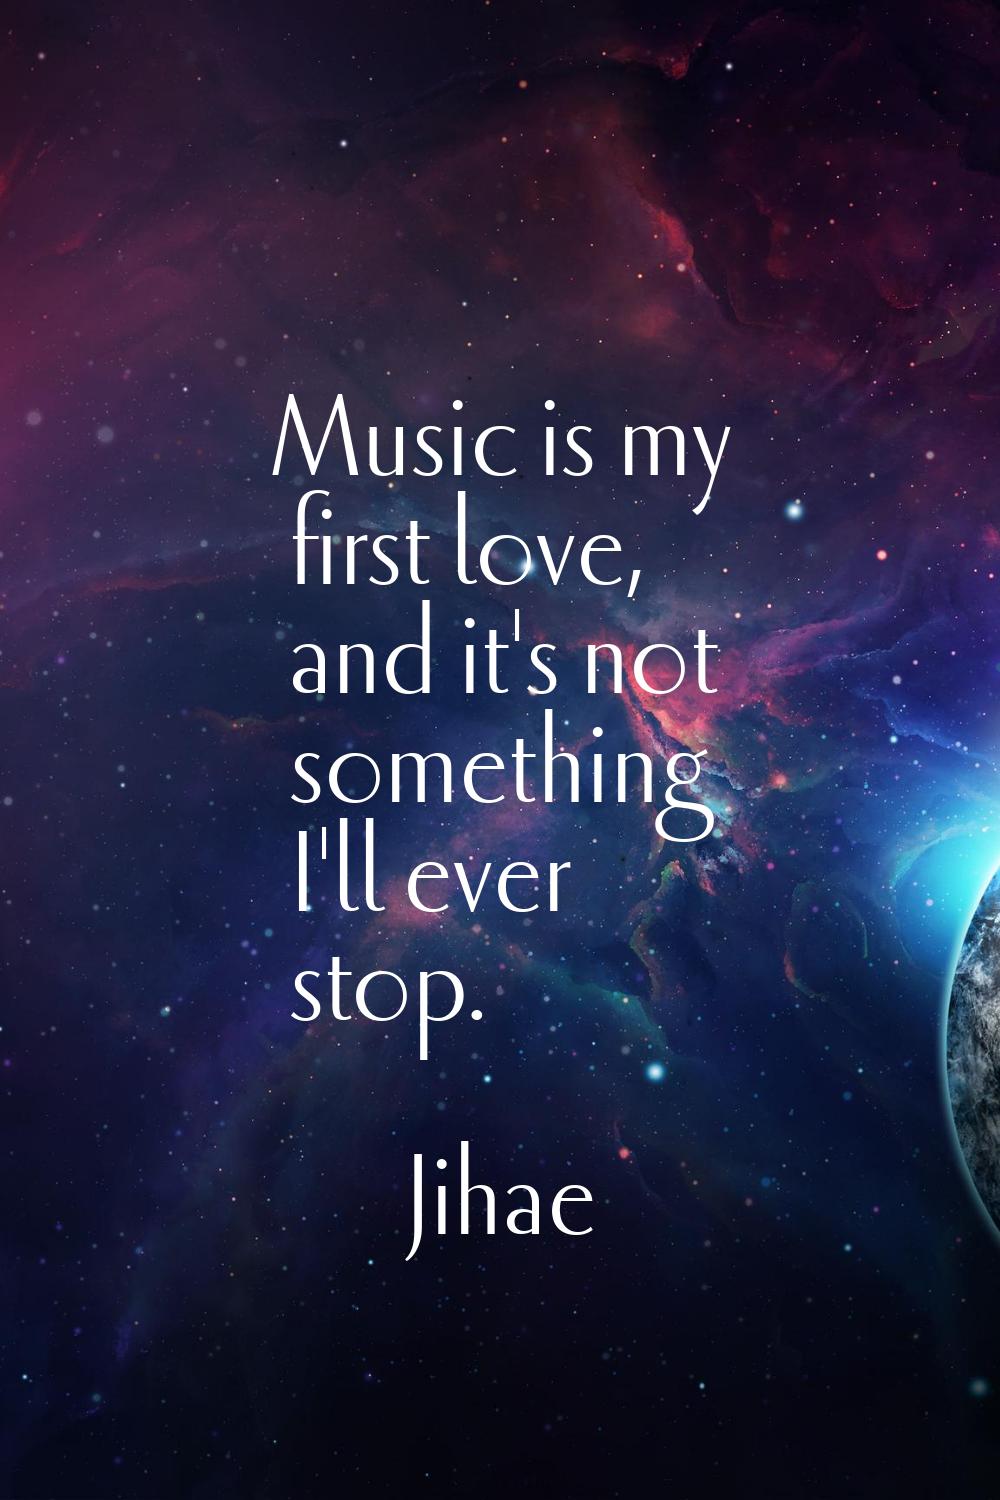 Music is my first love, and it's not something I'll ever stop.